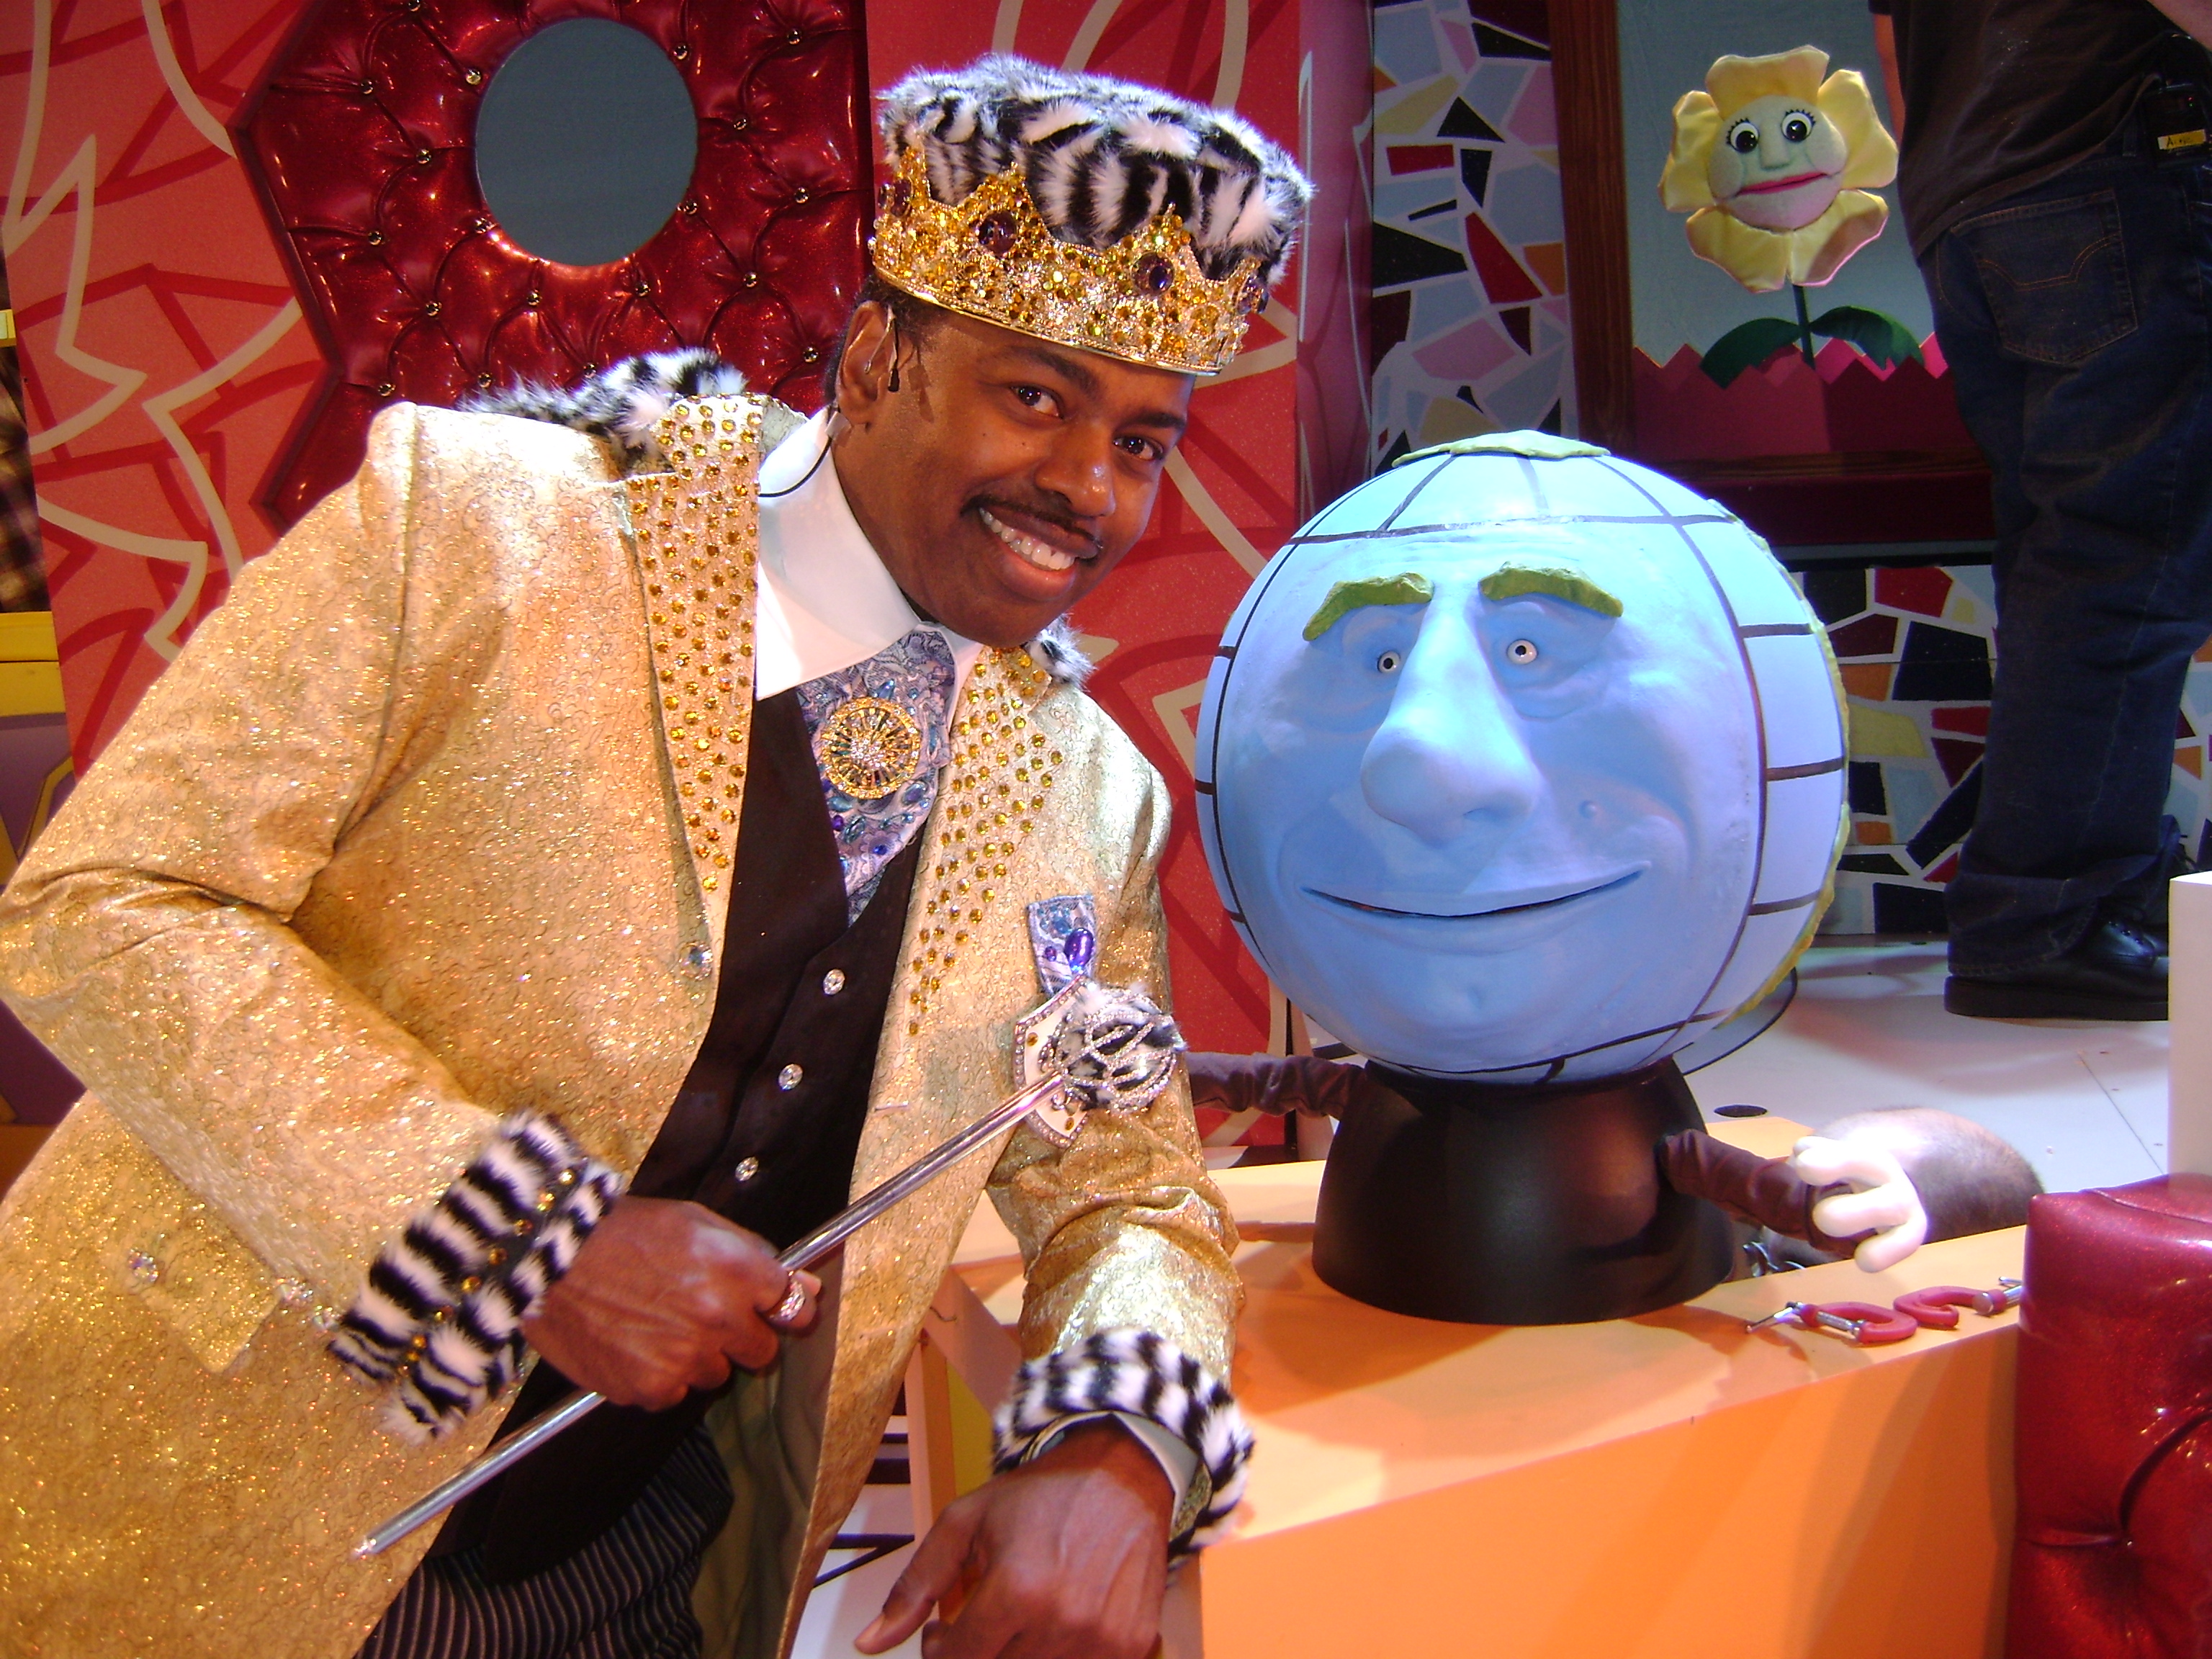 Lance Roberts as The King of Cartoons and the voice of Globey in The Peewee Herman Show Live in LA